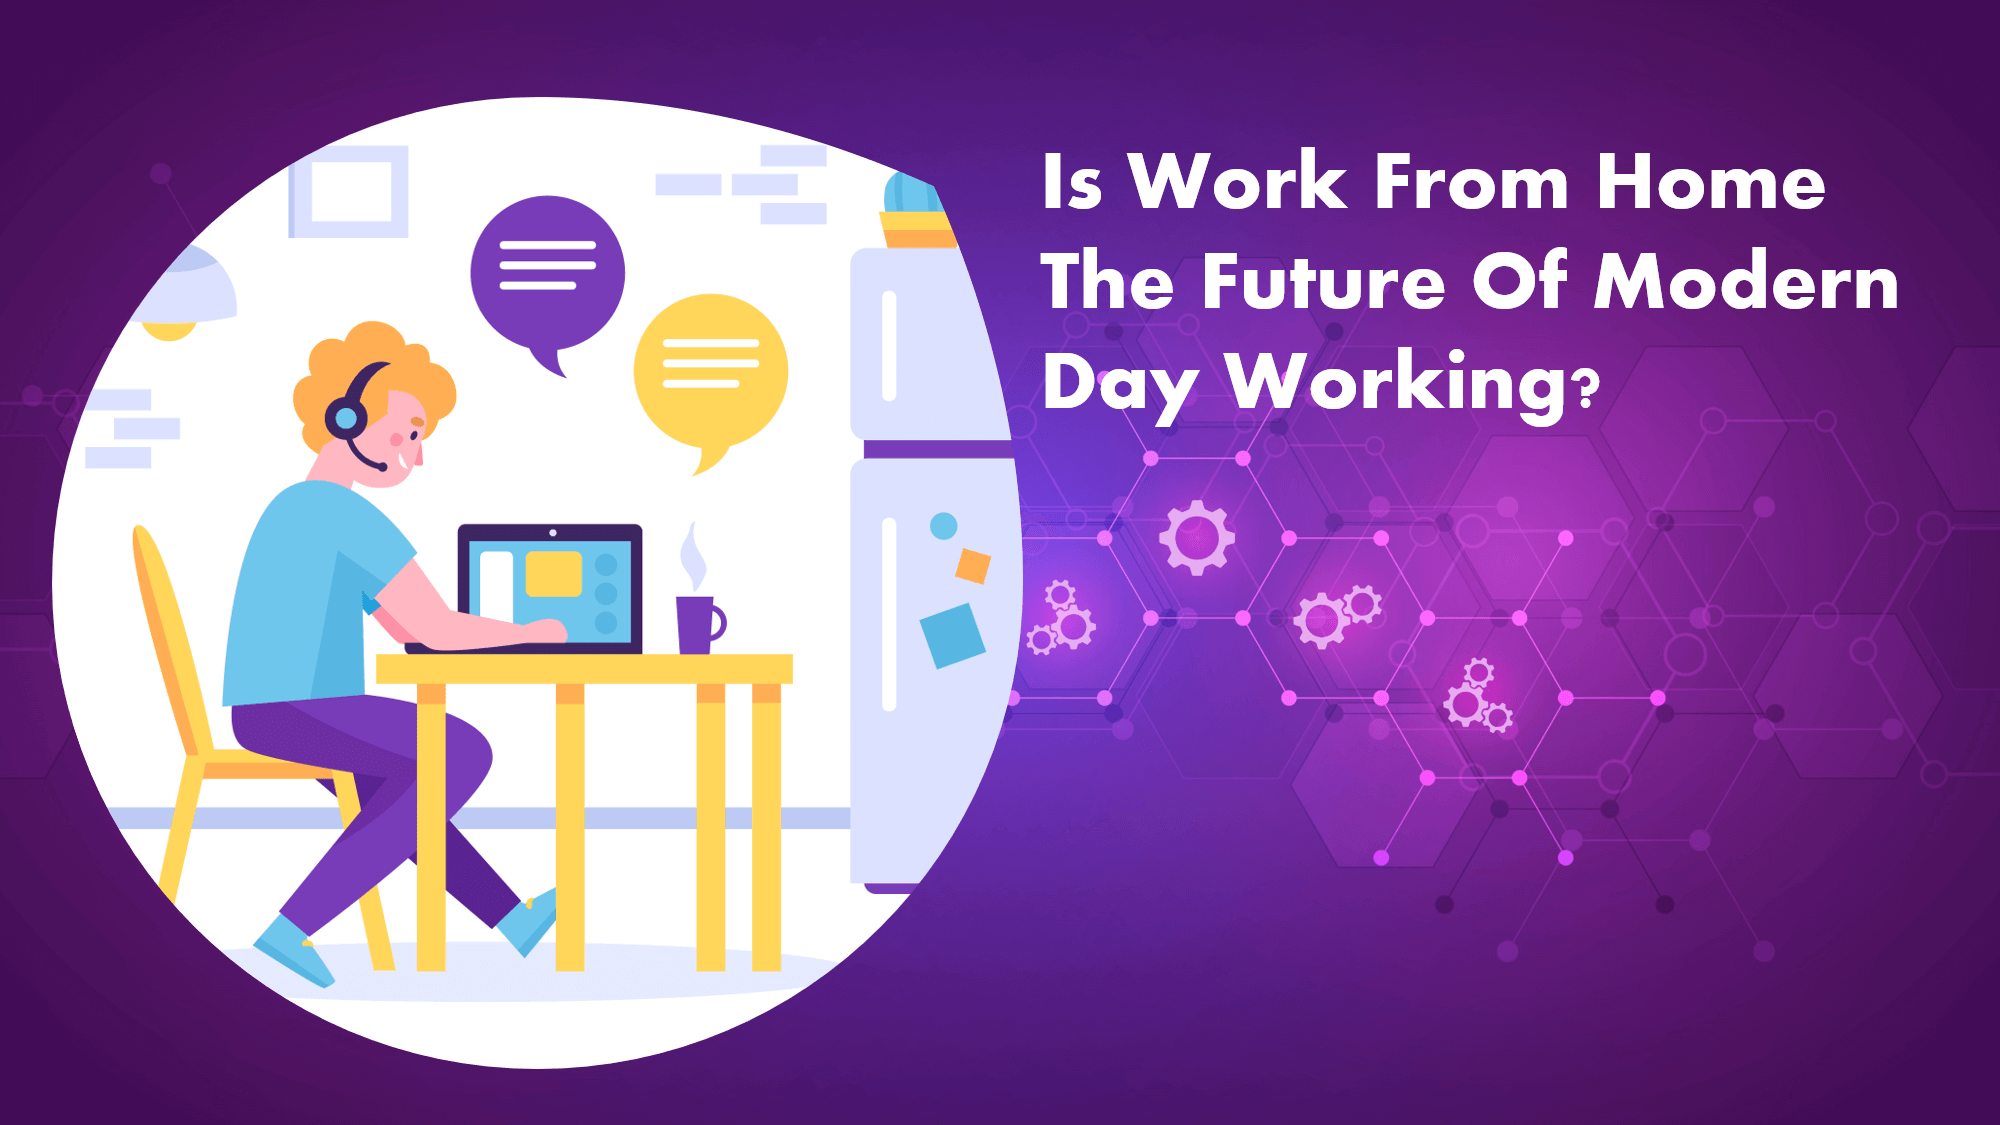 Is Work From Home the Future of Modern Day Working